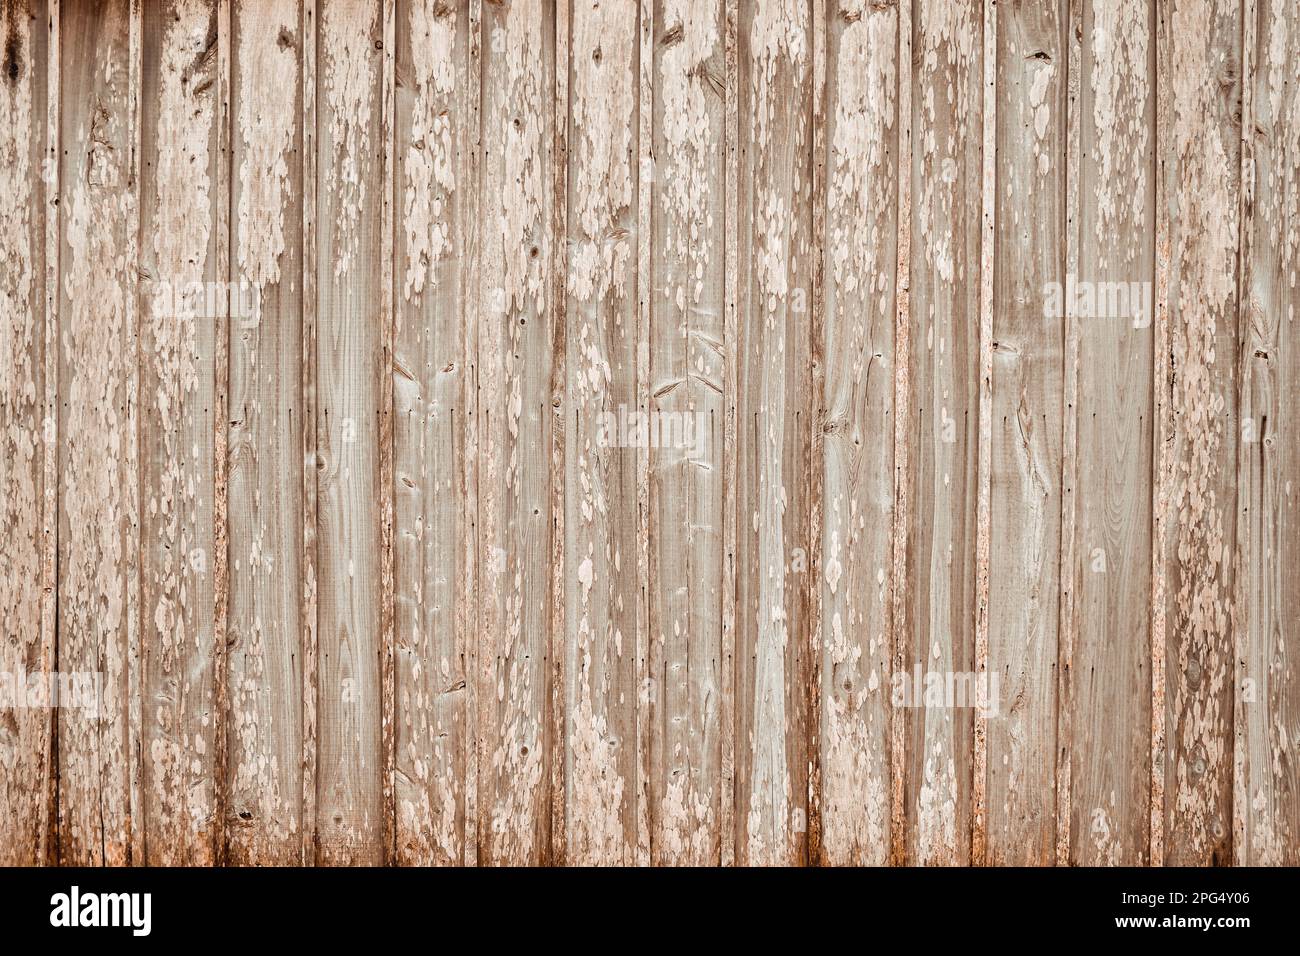 Brown weathered textured wood board and batten background Stock Photo